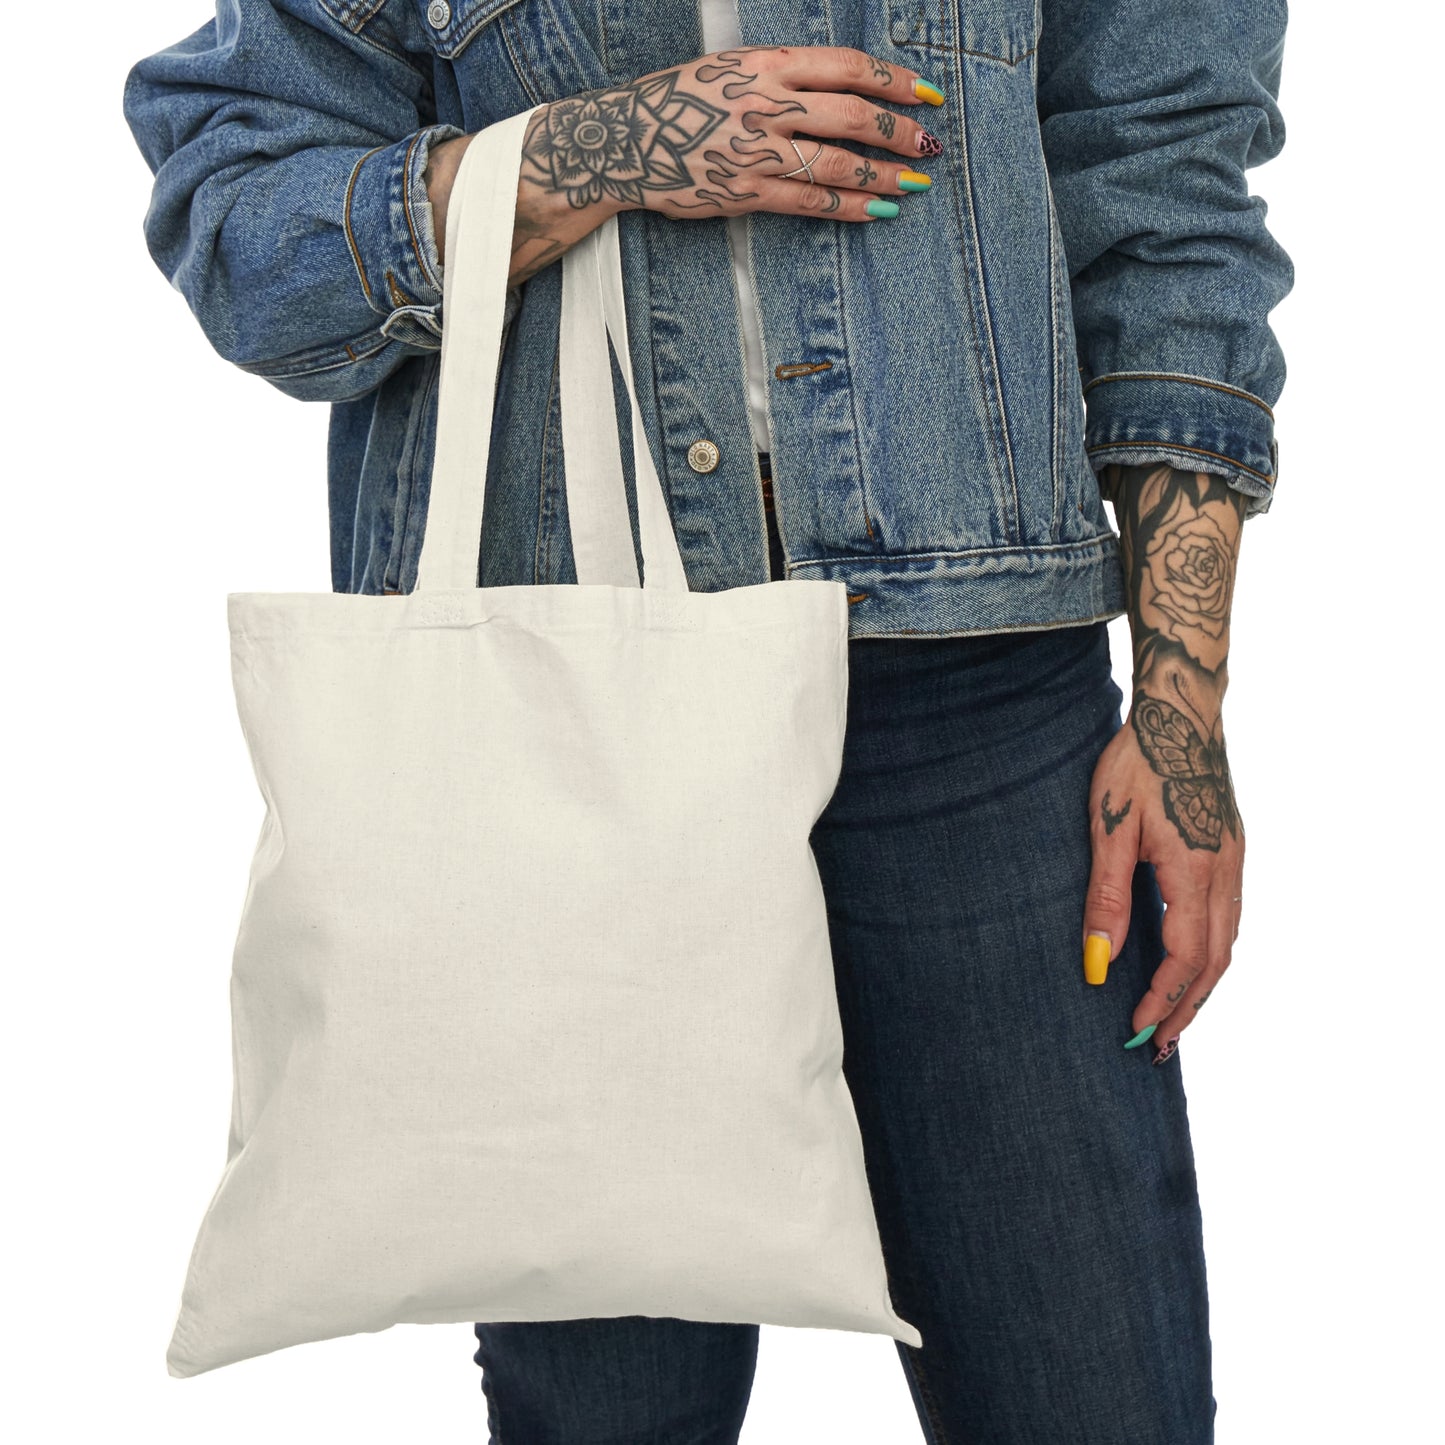 All Because Of You - Natural Tote Bag